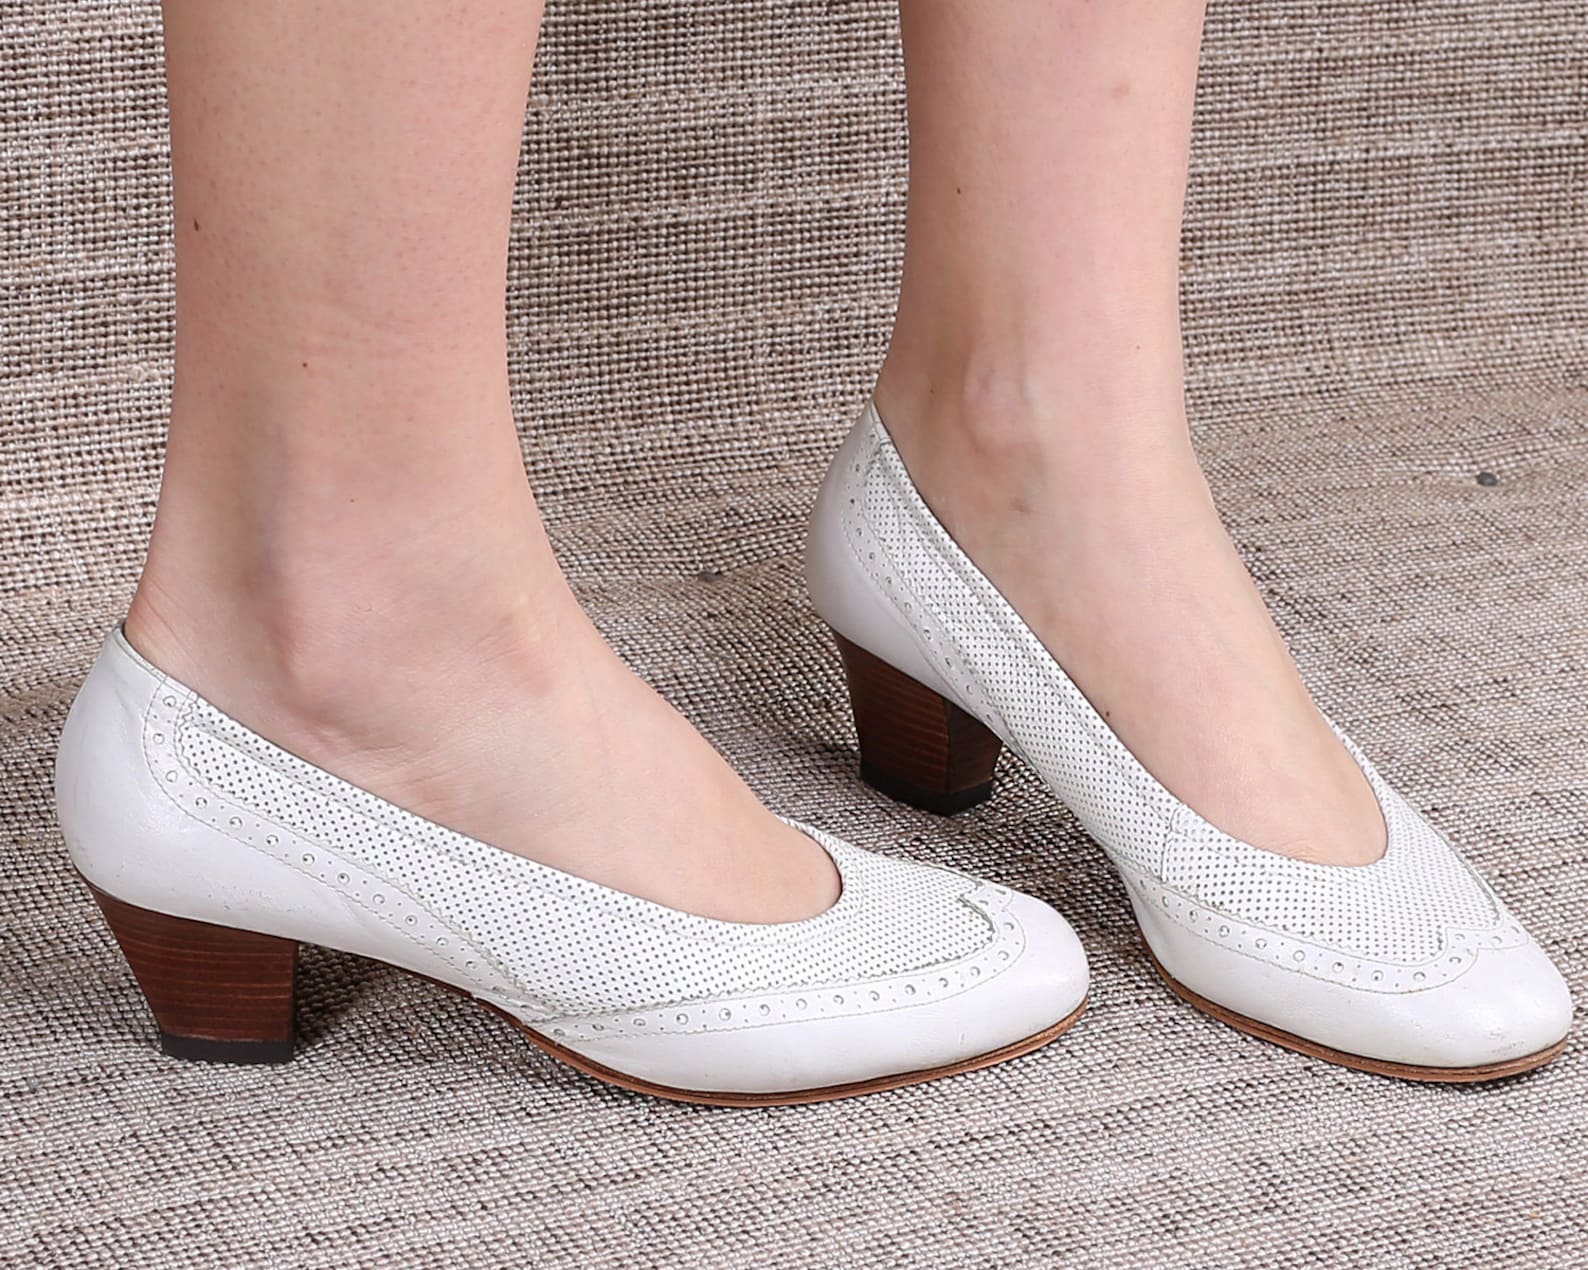 us size 7.5 white leather flats 80s oxford pumps white ballet slip ons stacked heel vintage shoes 1980s germany made. eur 38 uk